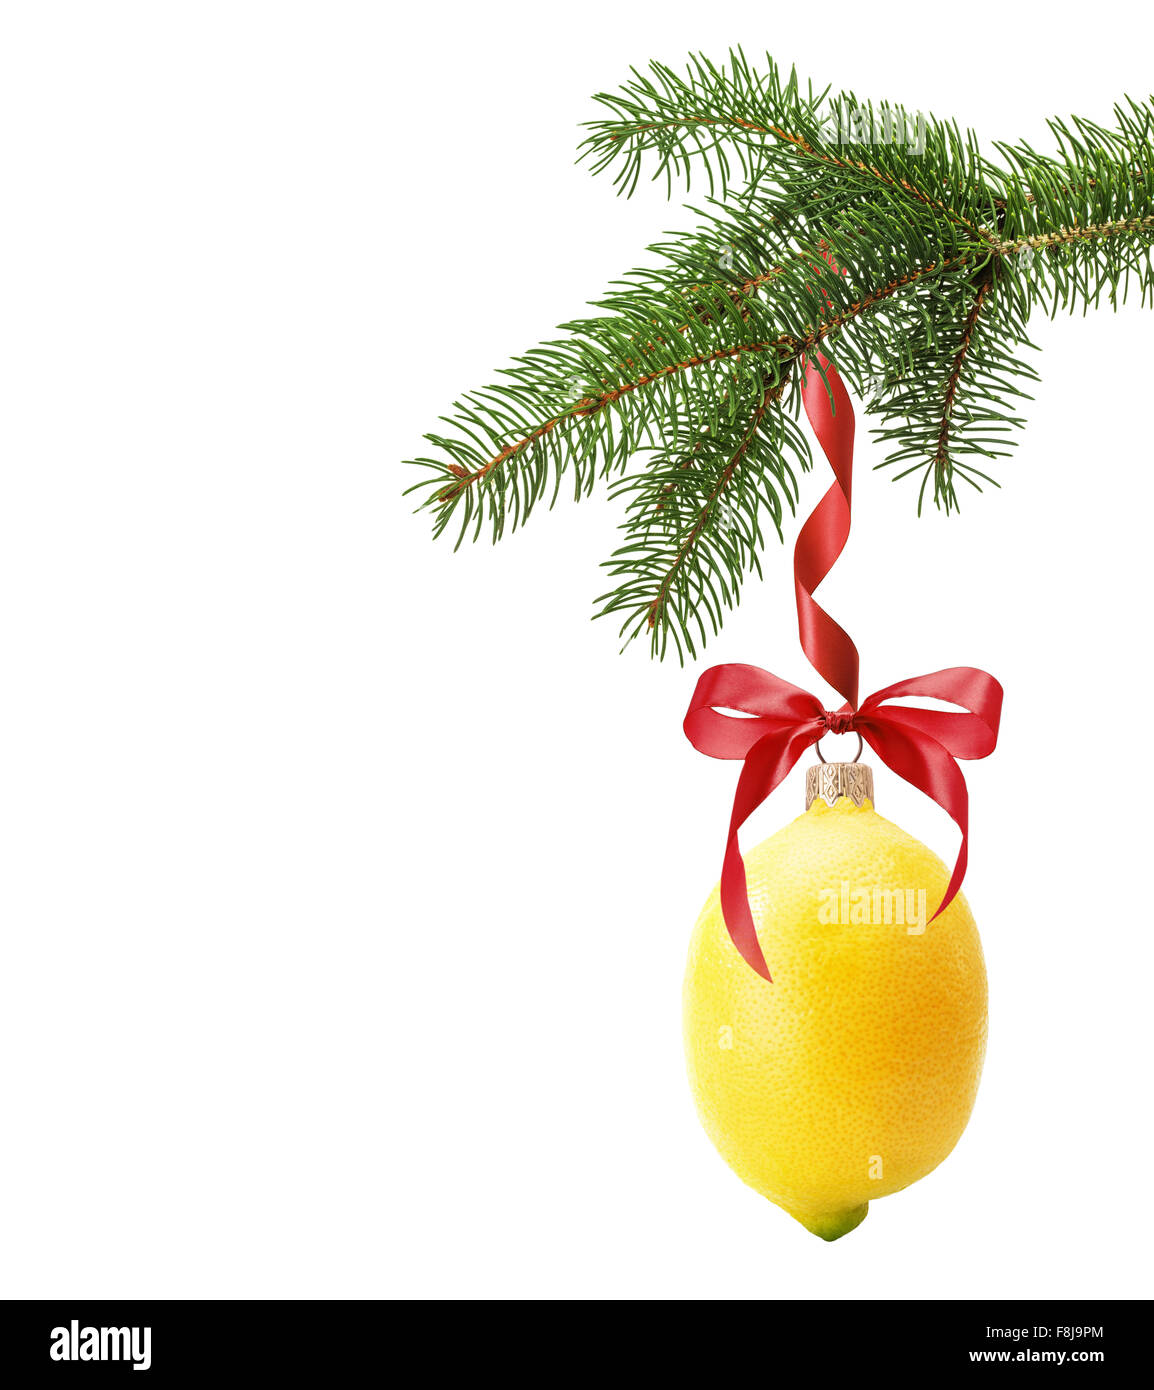 Christmas tree branch with Christmas ball in shape of lemon isolated on the white background. Stock Photo